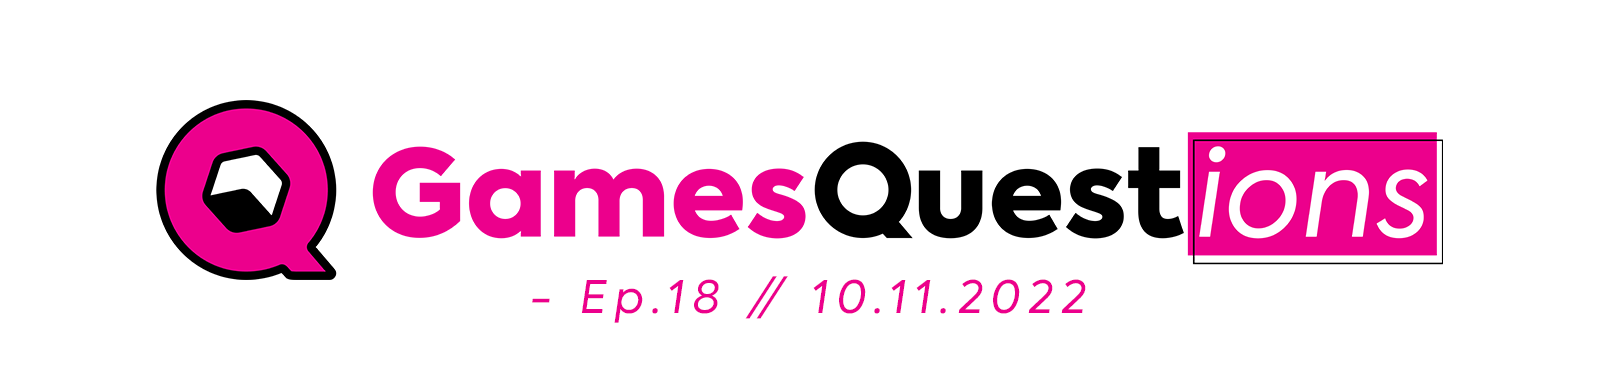 GamesQuestions Ep.18 // 10.11.2022